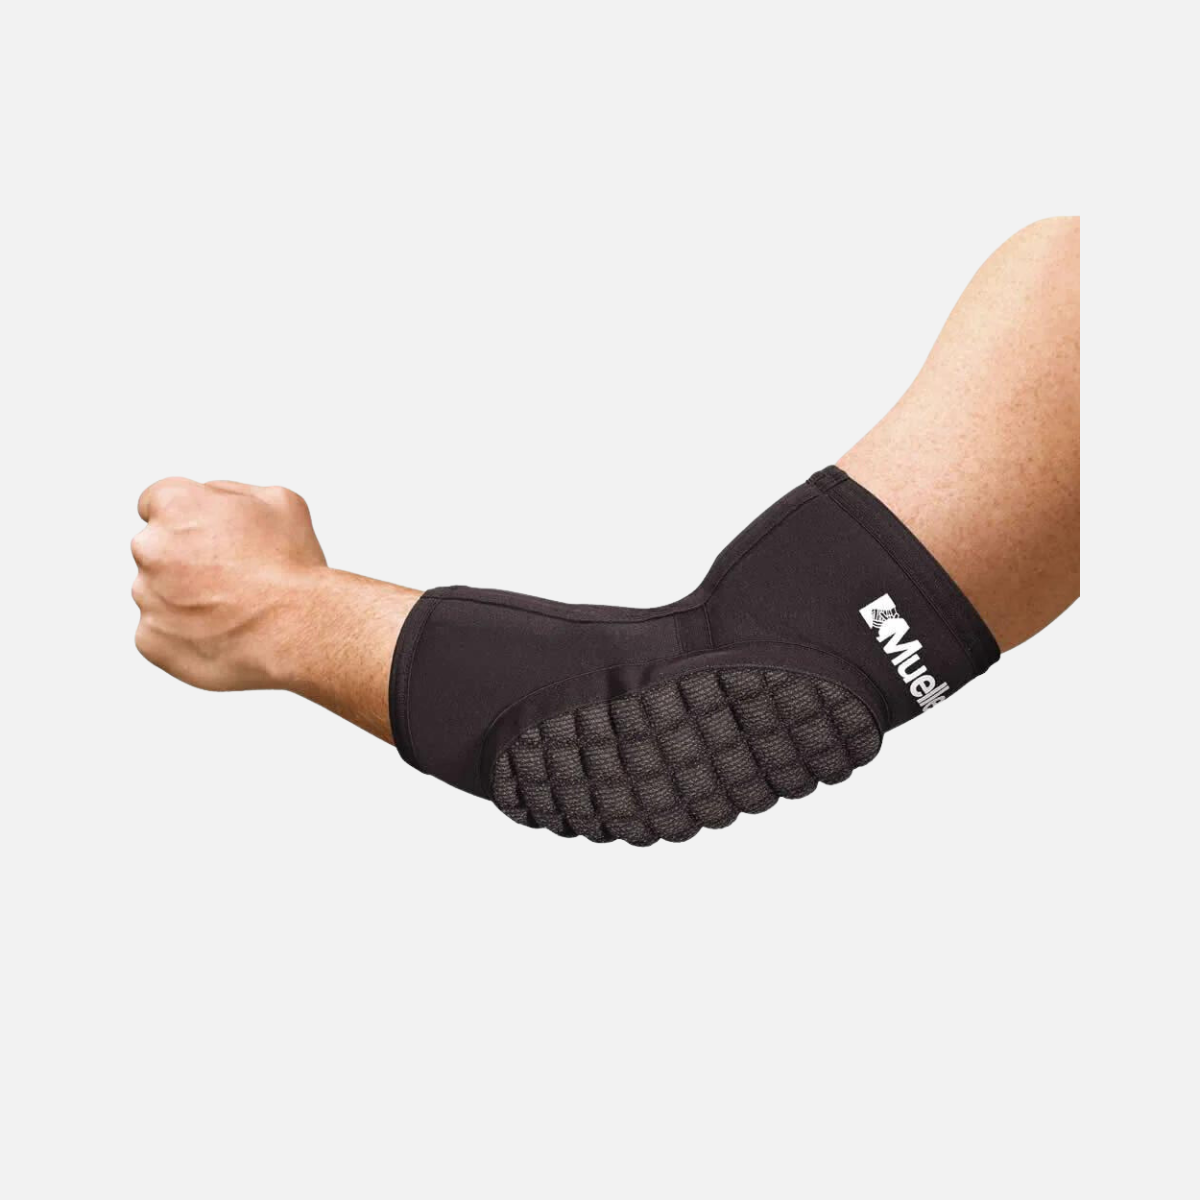 Mueller Pro Level Elbow Pad with Kevlar -Black